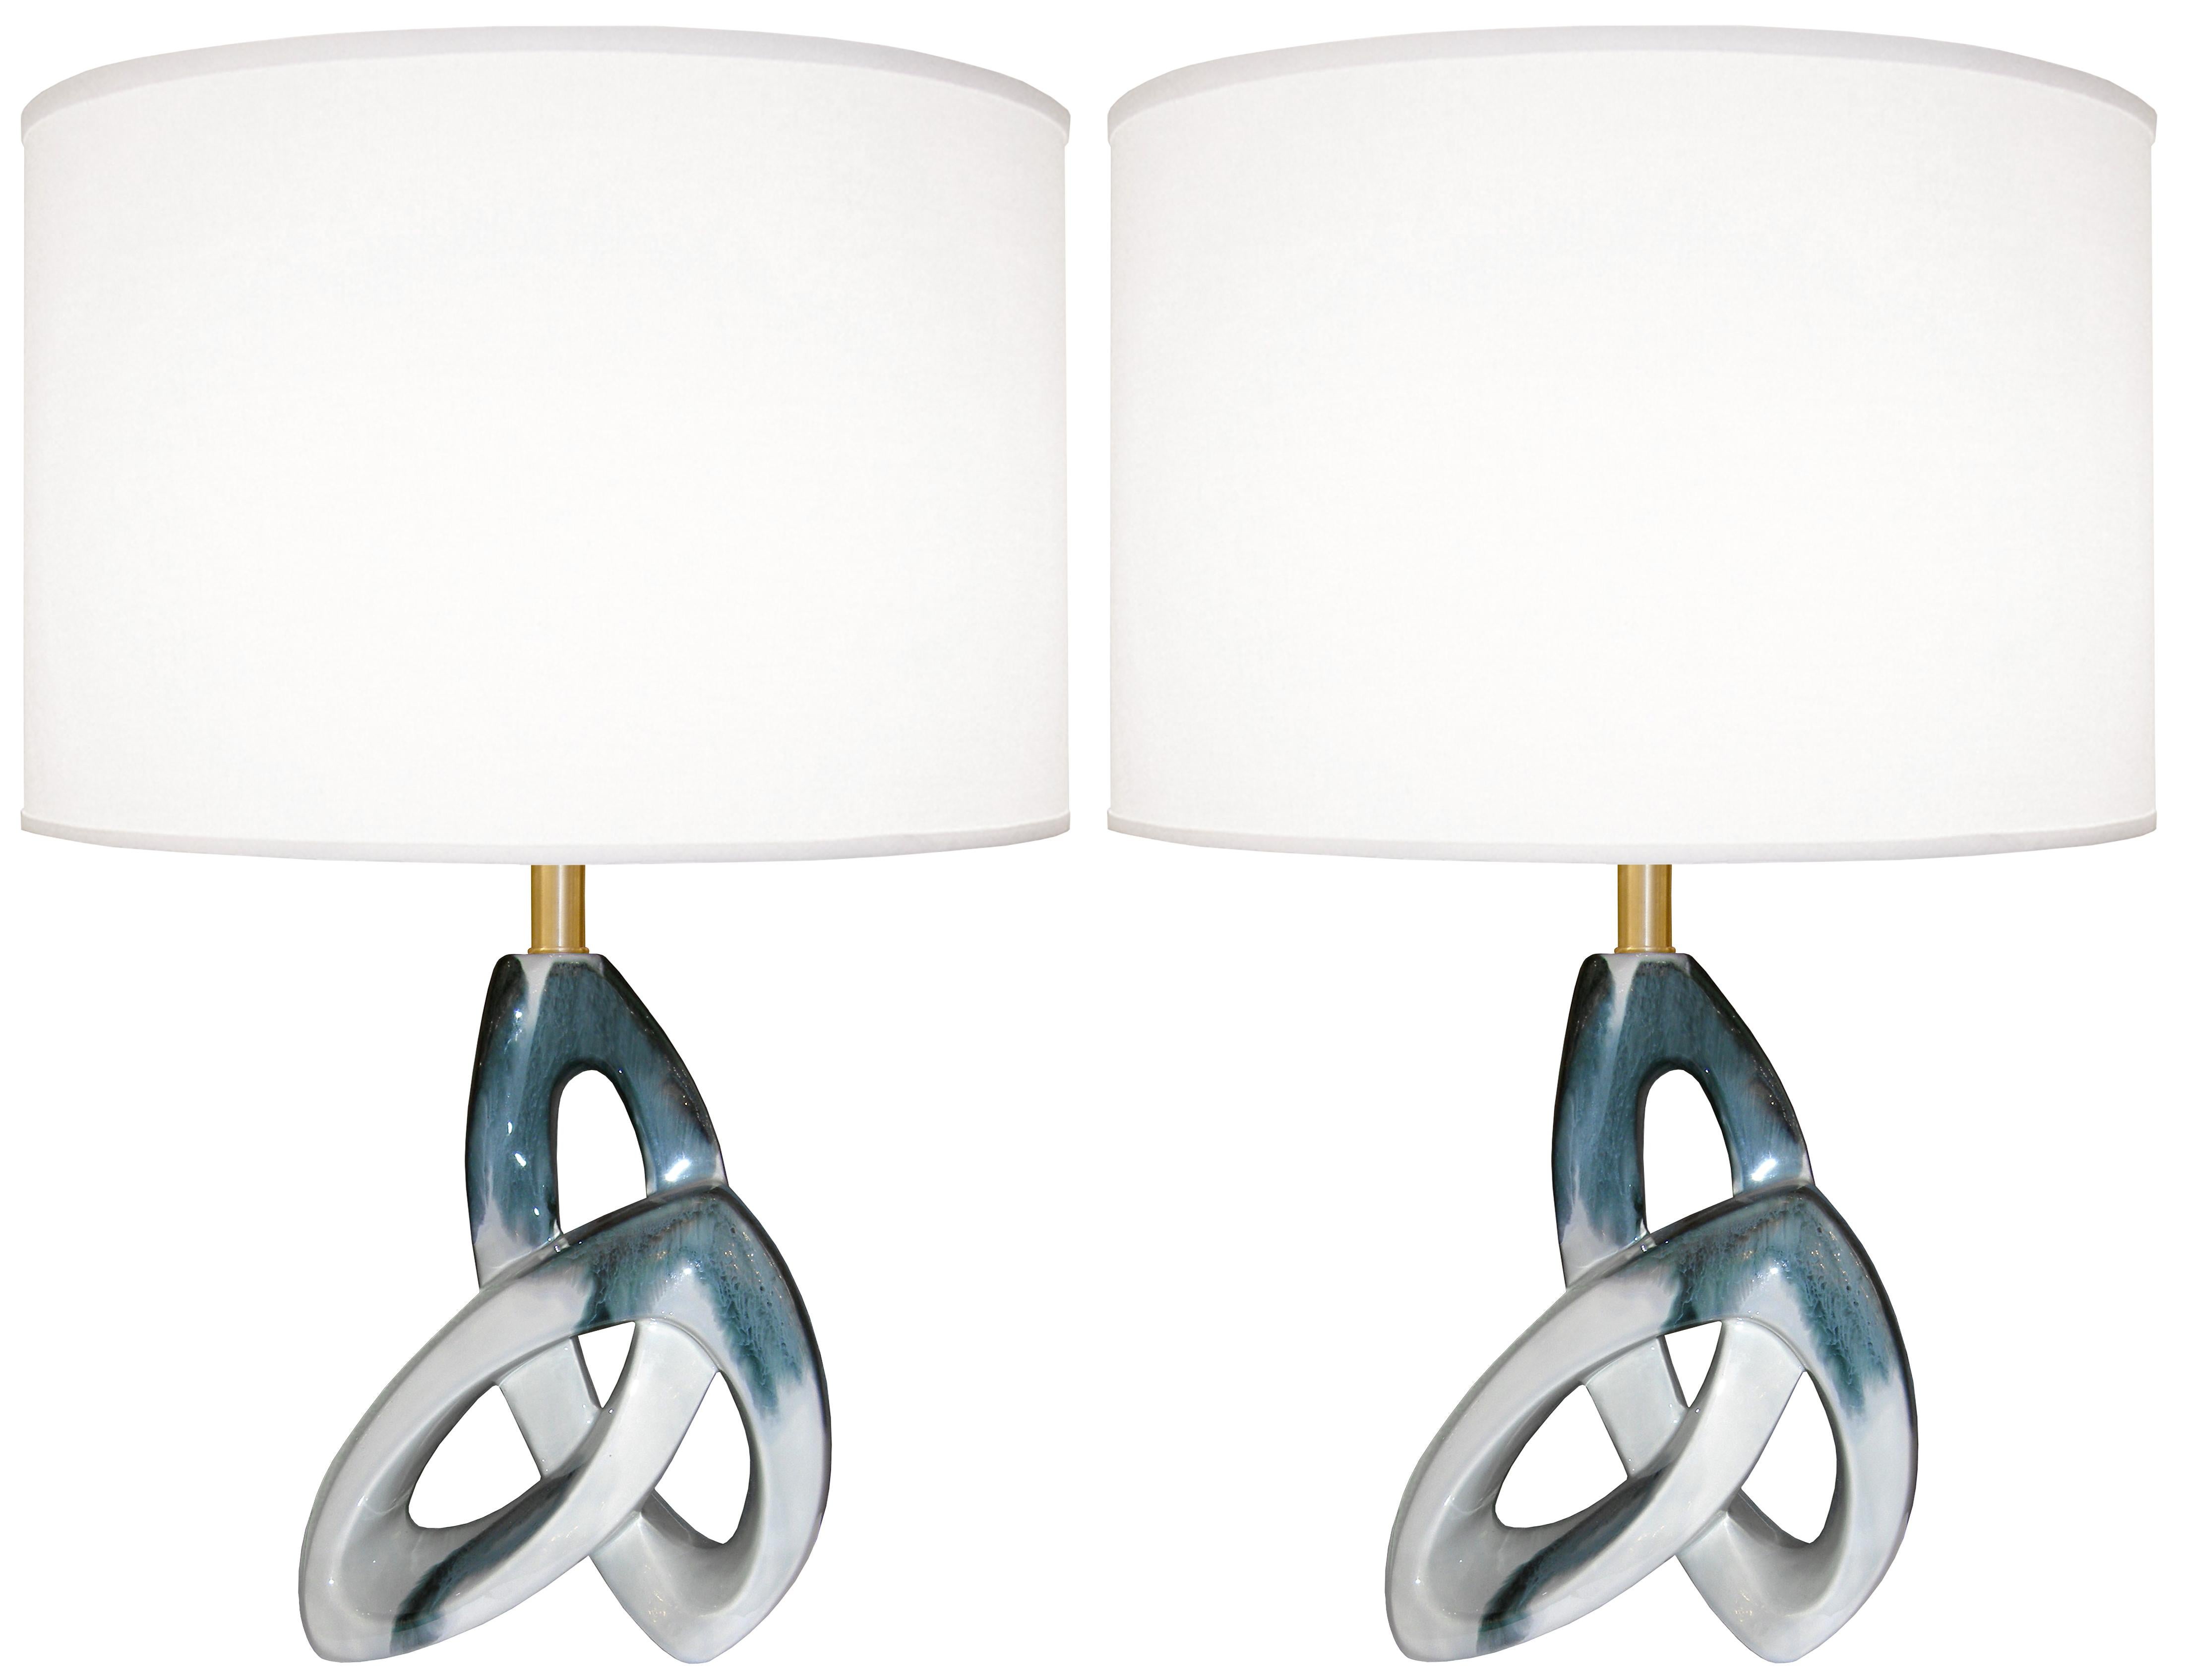 A pair of sculptural ceramic lamps with brass hardware.

Circa 1960's

Lamp Shades Are Not Included.

If you are interested in Lamp Shades, please email The Craig Van Den Brulle Design Team Via Message Center, and we will provide you with a